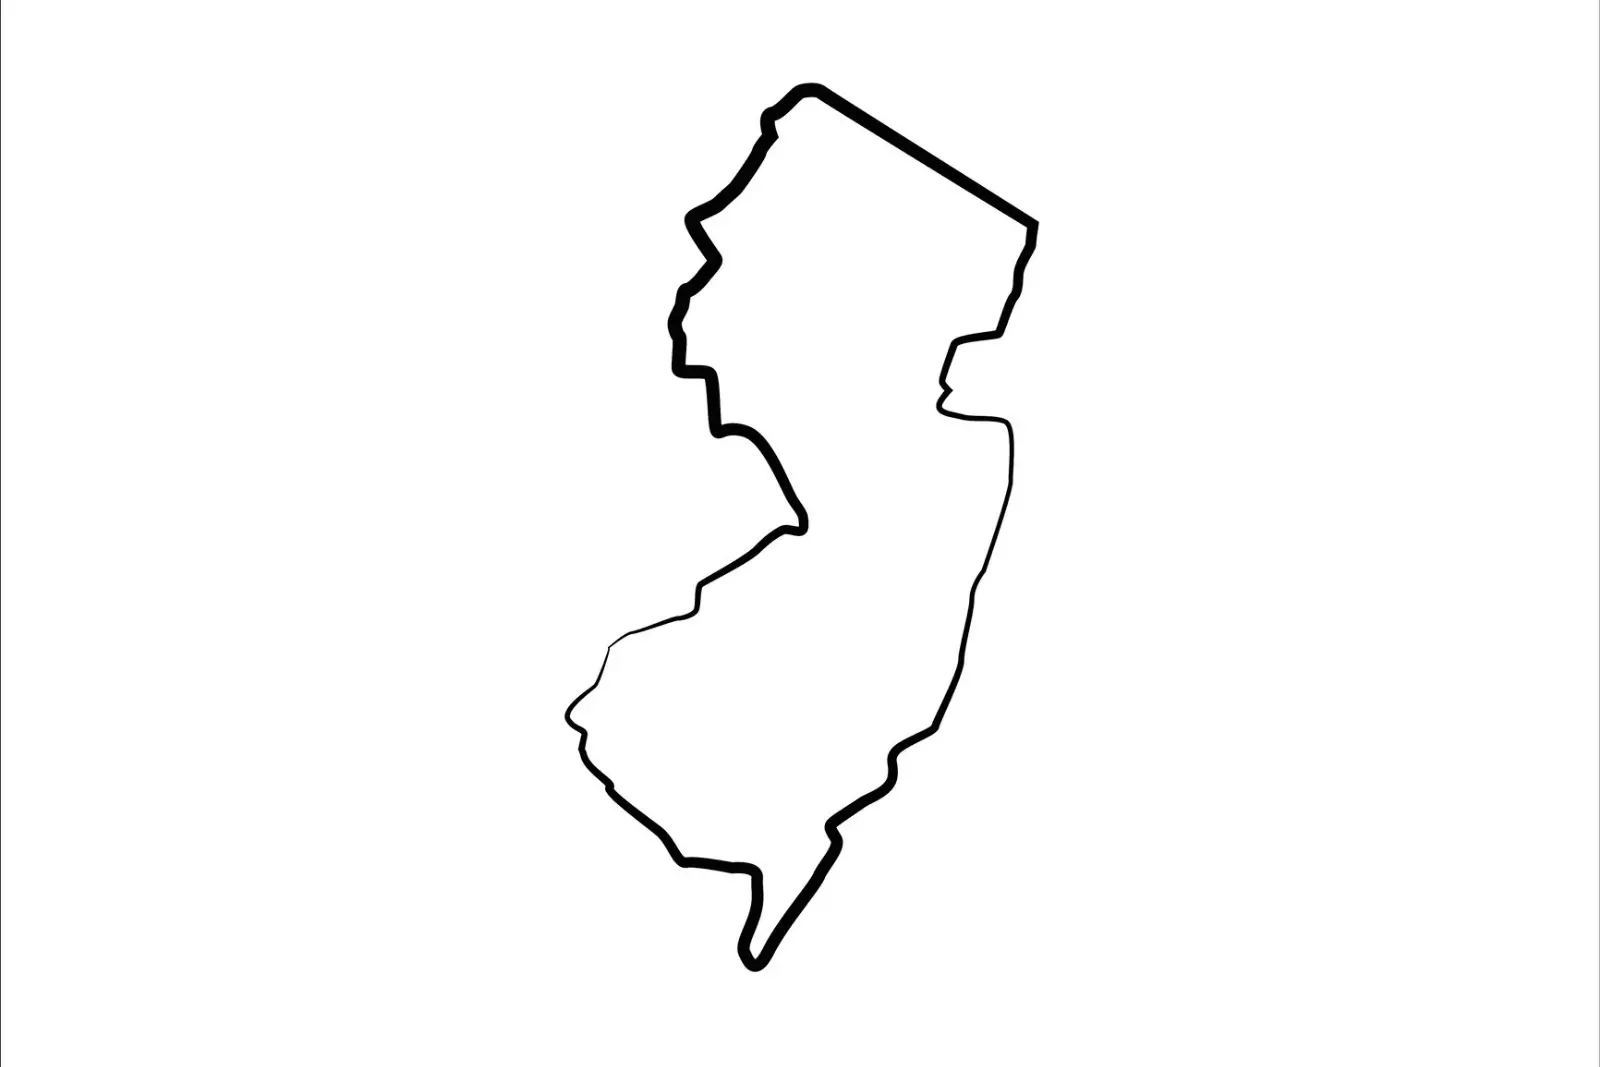 Here are the North, Central and South Jersey borders as determined